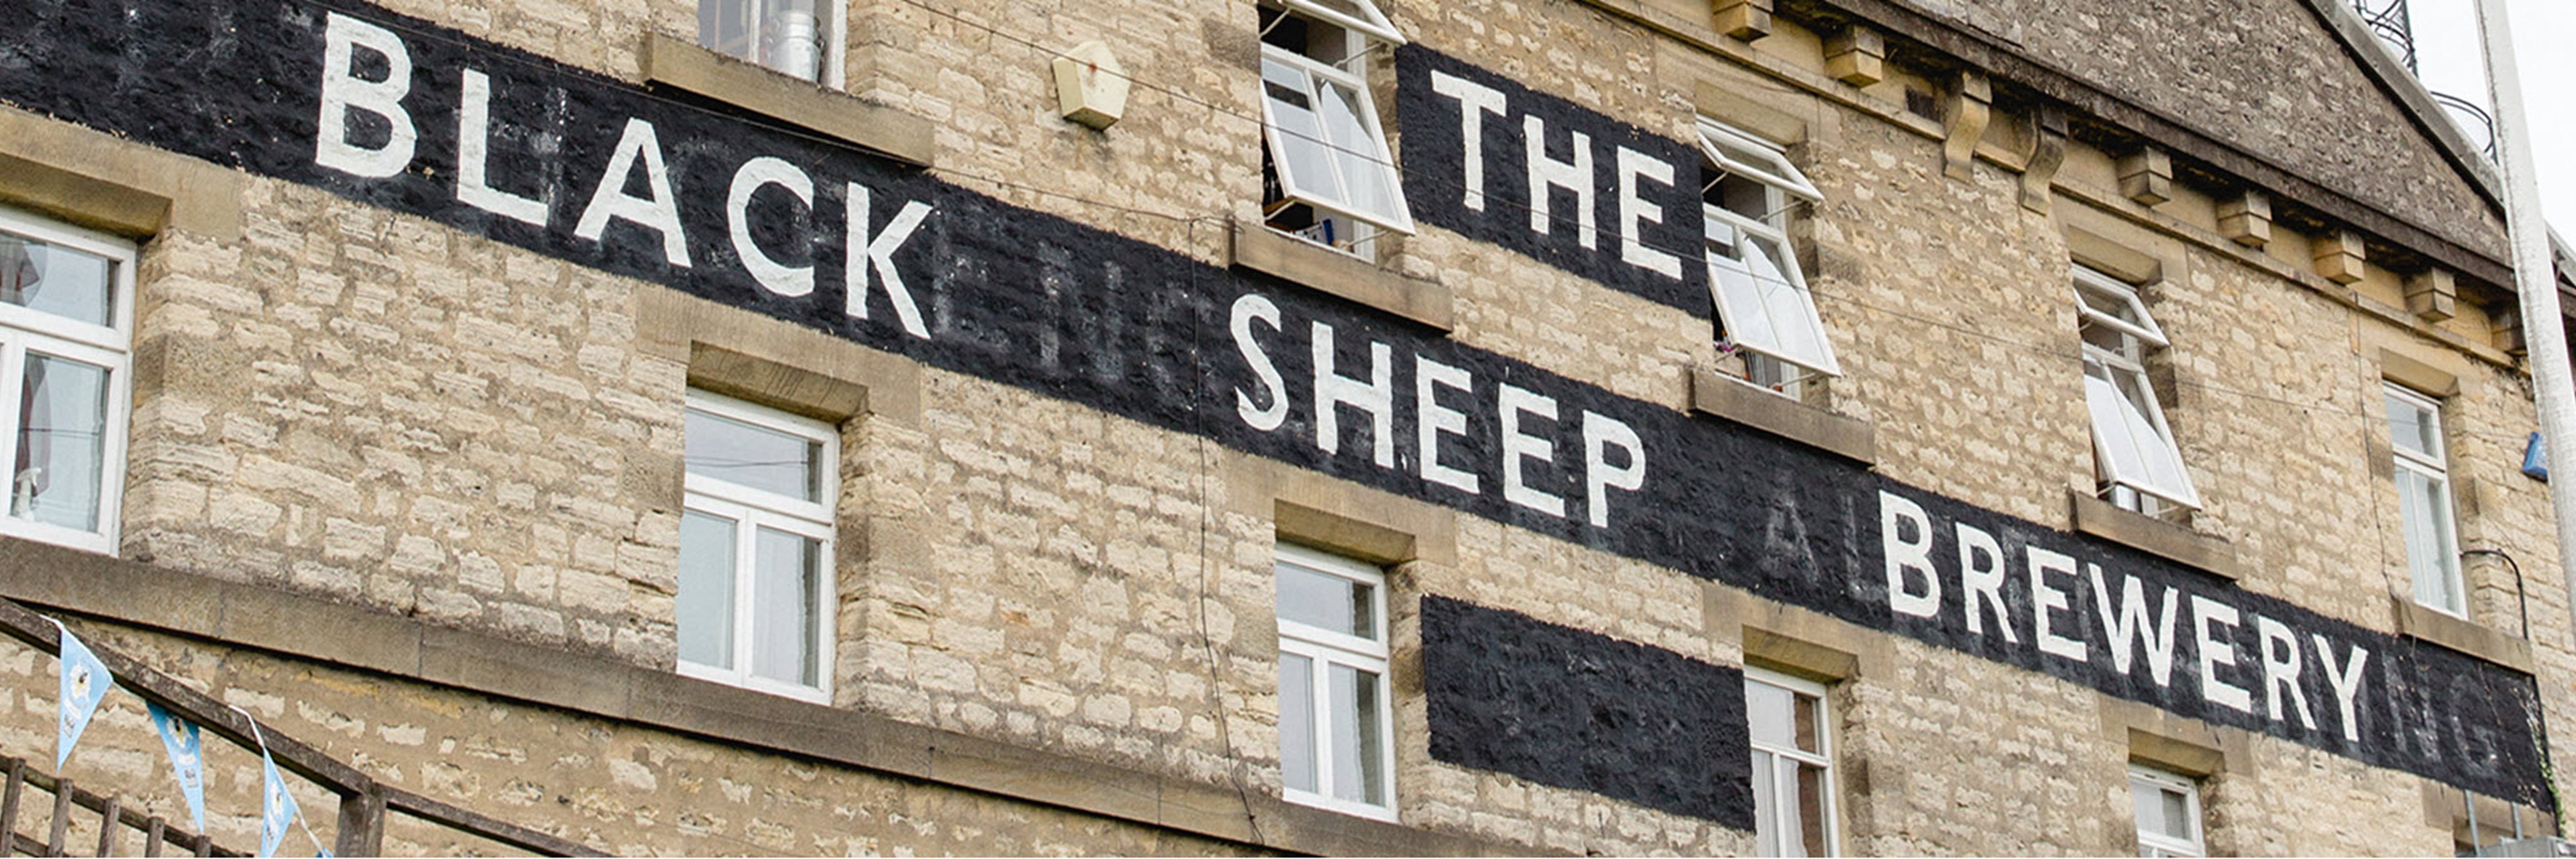 The Black Sheep Brewery Tour